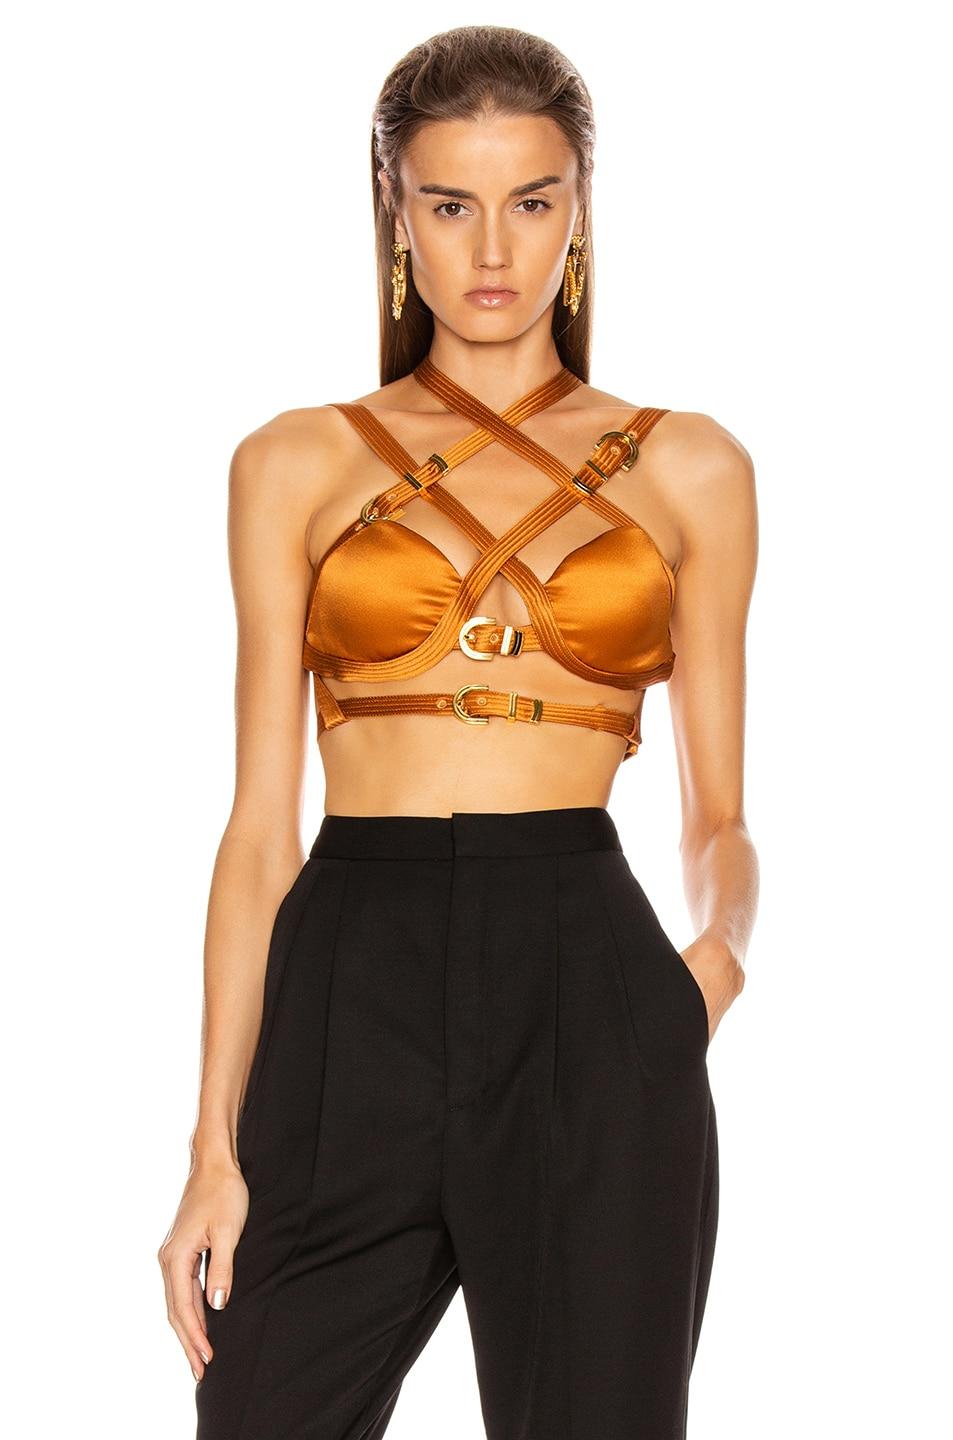 Versace Fall 2019 Runway Caramel Cropped Bondage Top

Inspired by Versace's rich heritage, this cropped bondage top from Versace take us straight to a 90's vibe, when Donatella Versace showcased bold bondage-inspired corset tops. Crafted from